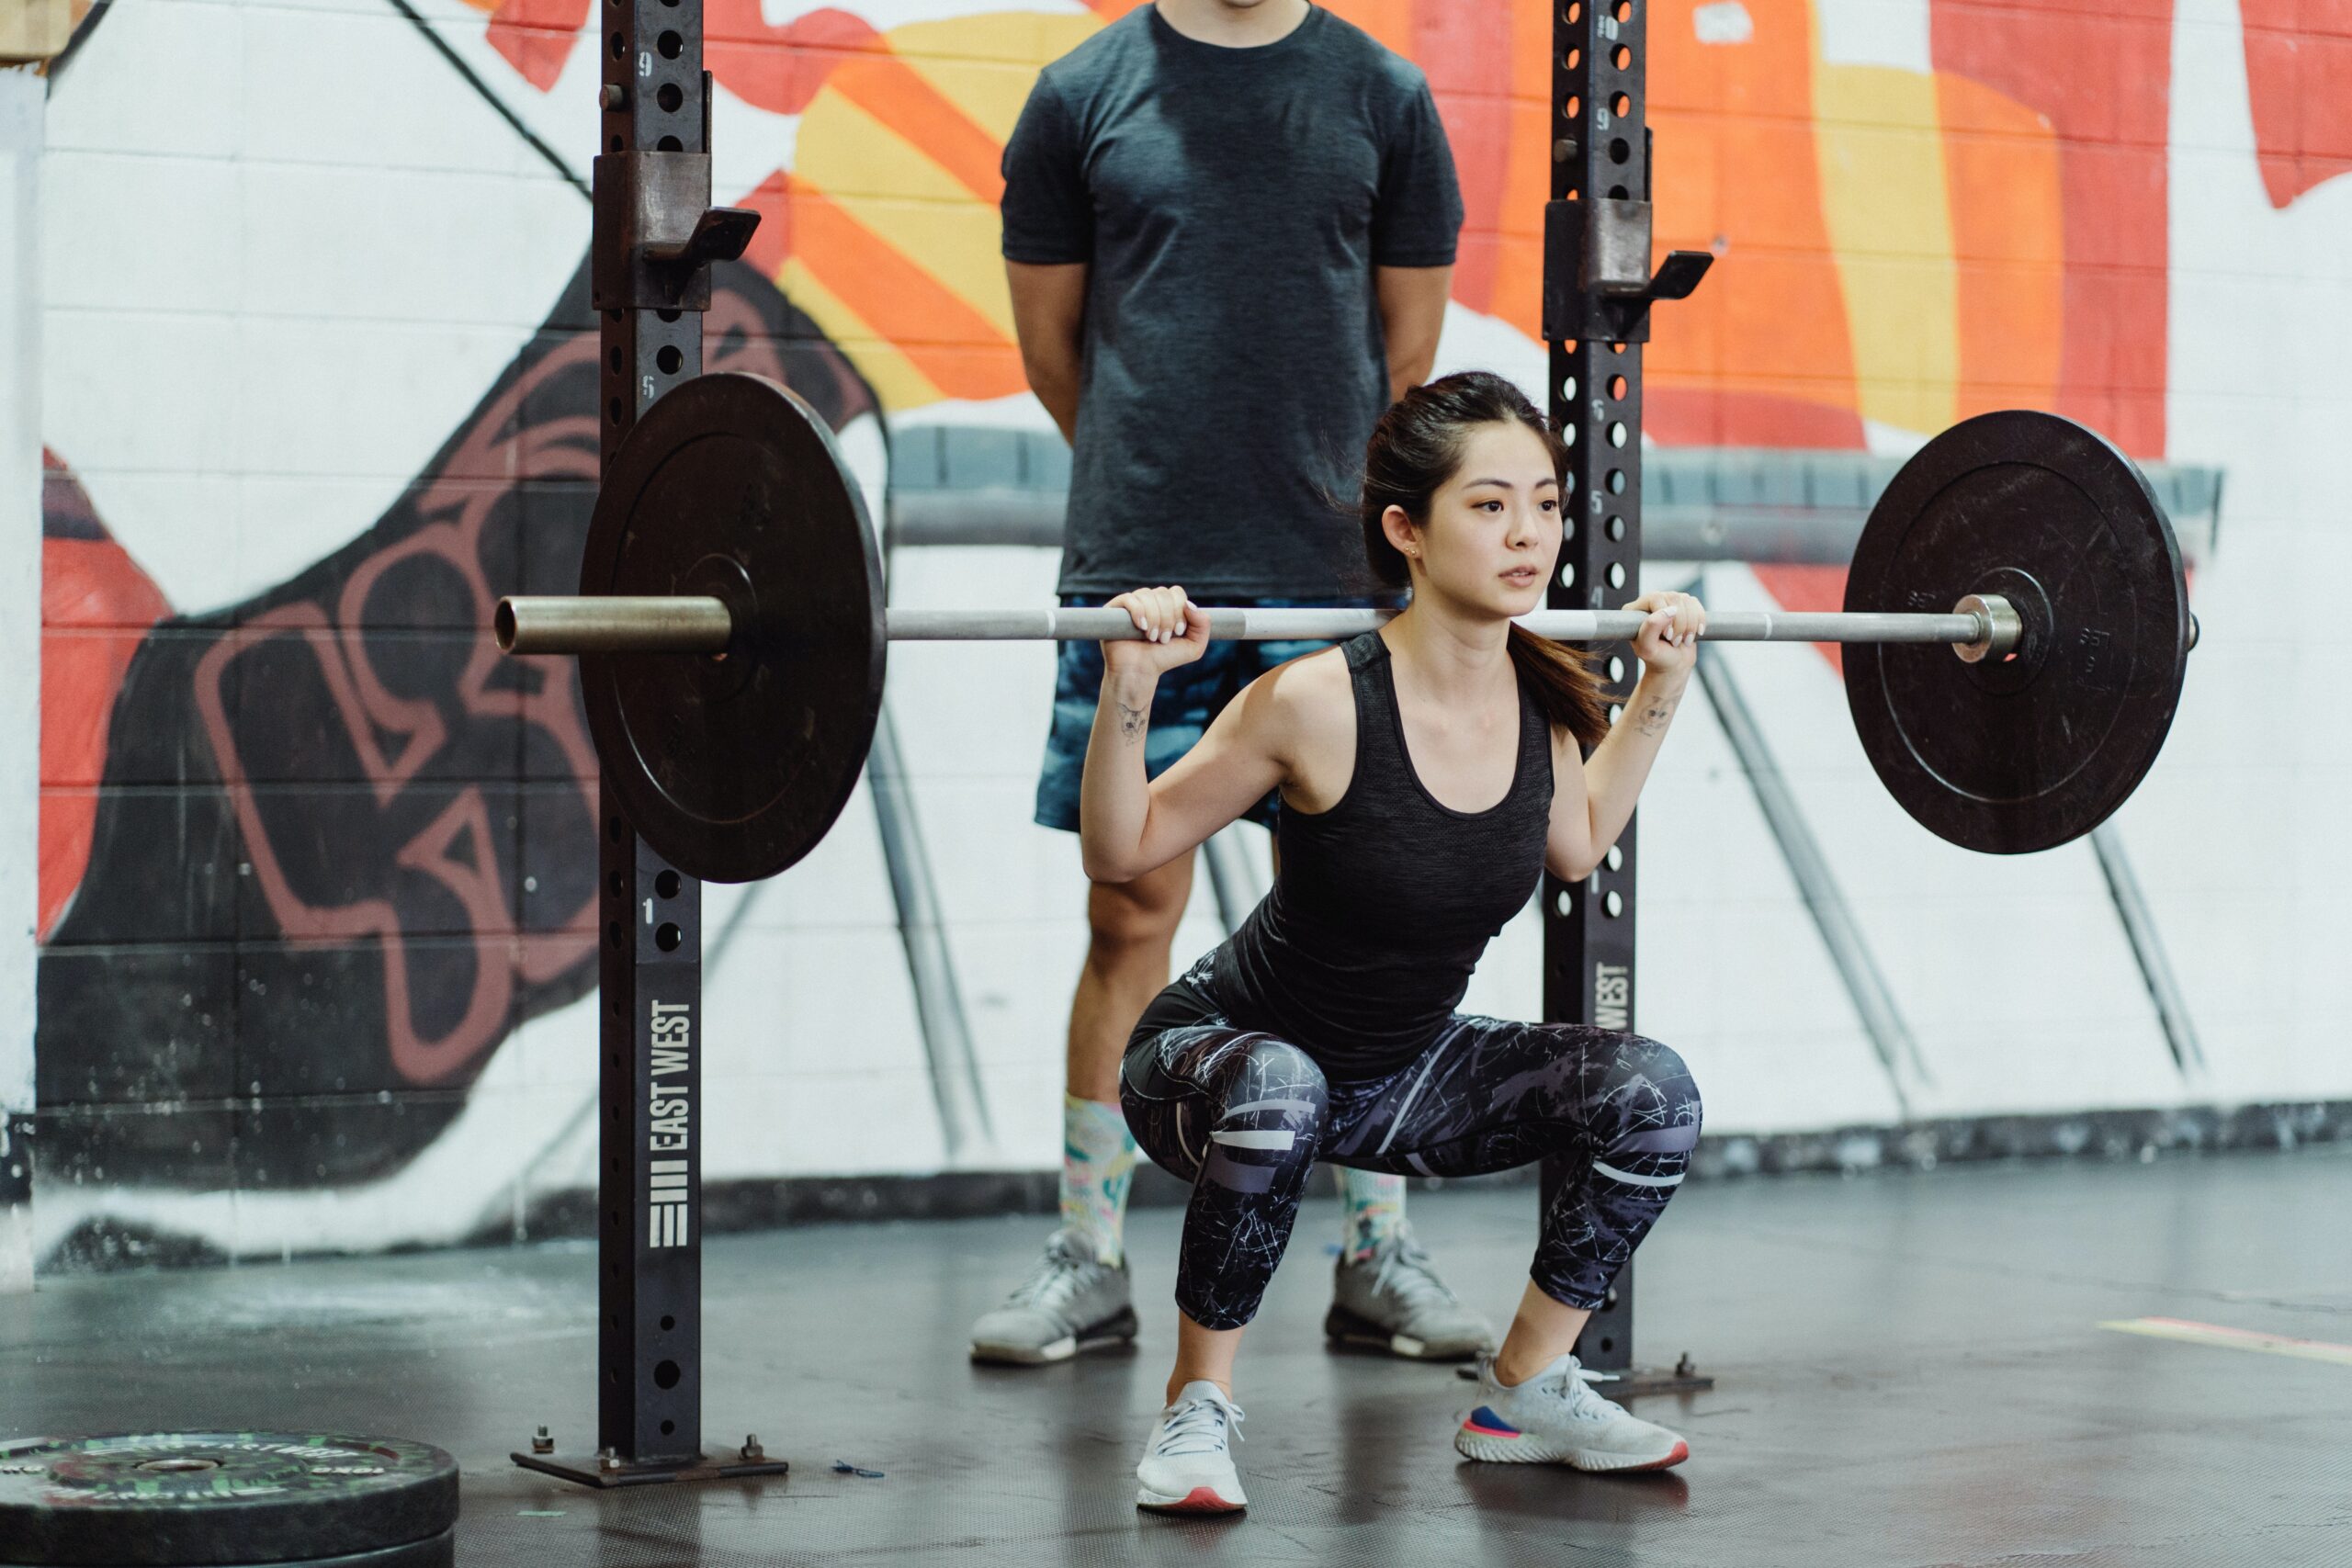 Squat Techniques to save time at the gym